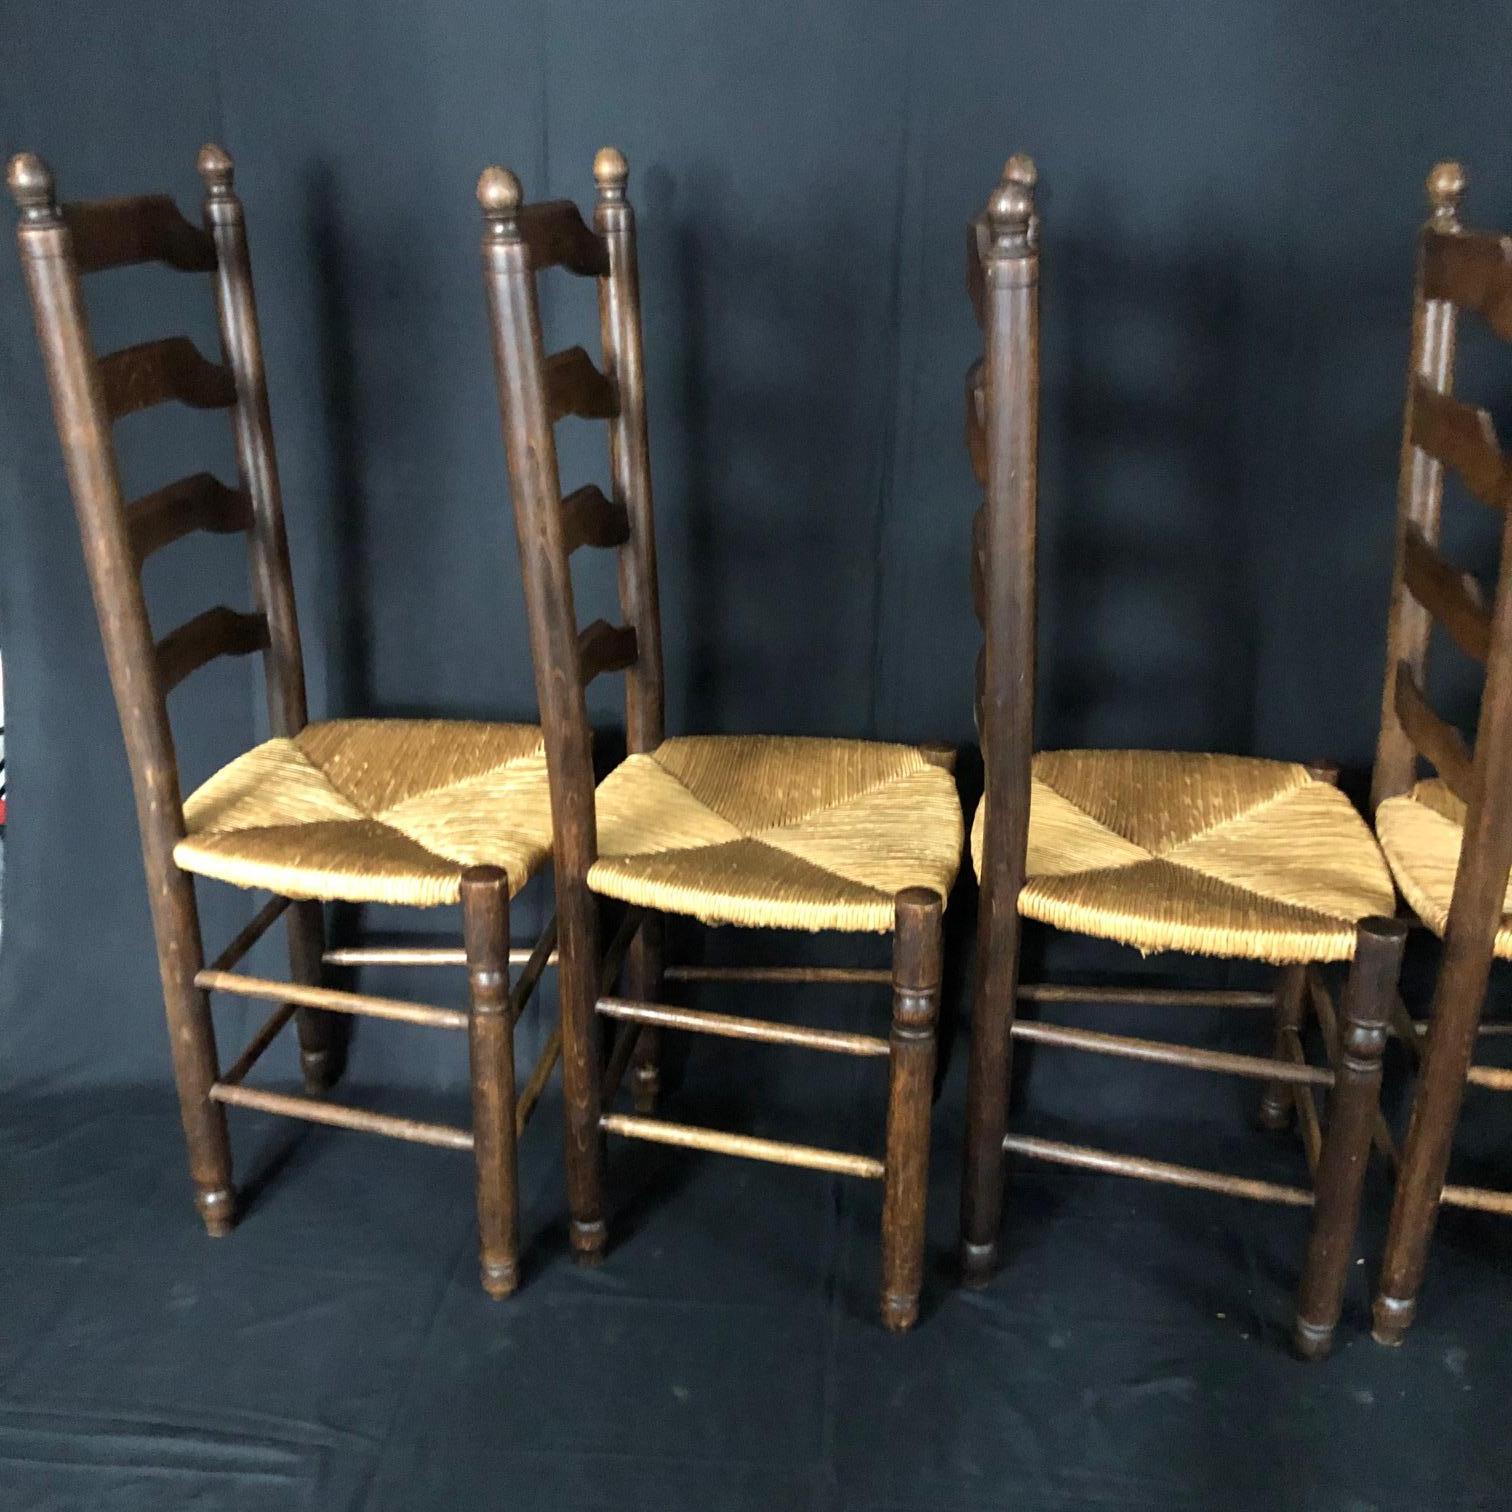 French Provincial Set of Six French Country Ladderback Chairs with Rush Seats